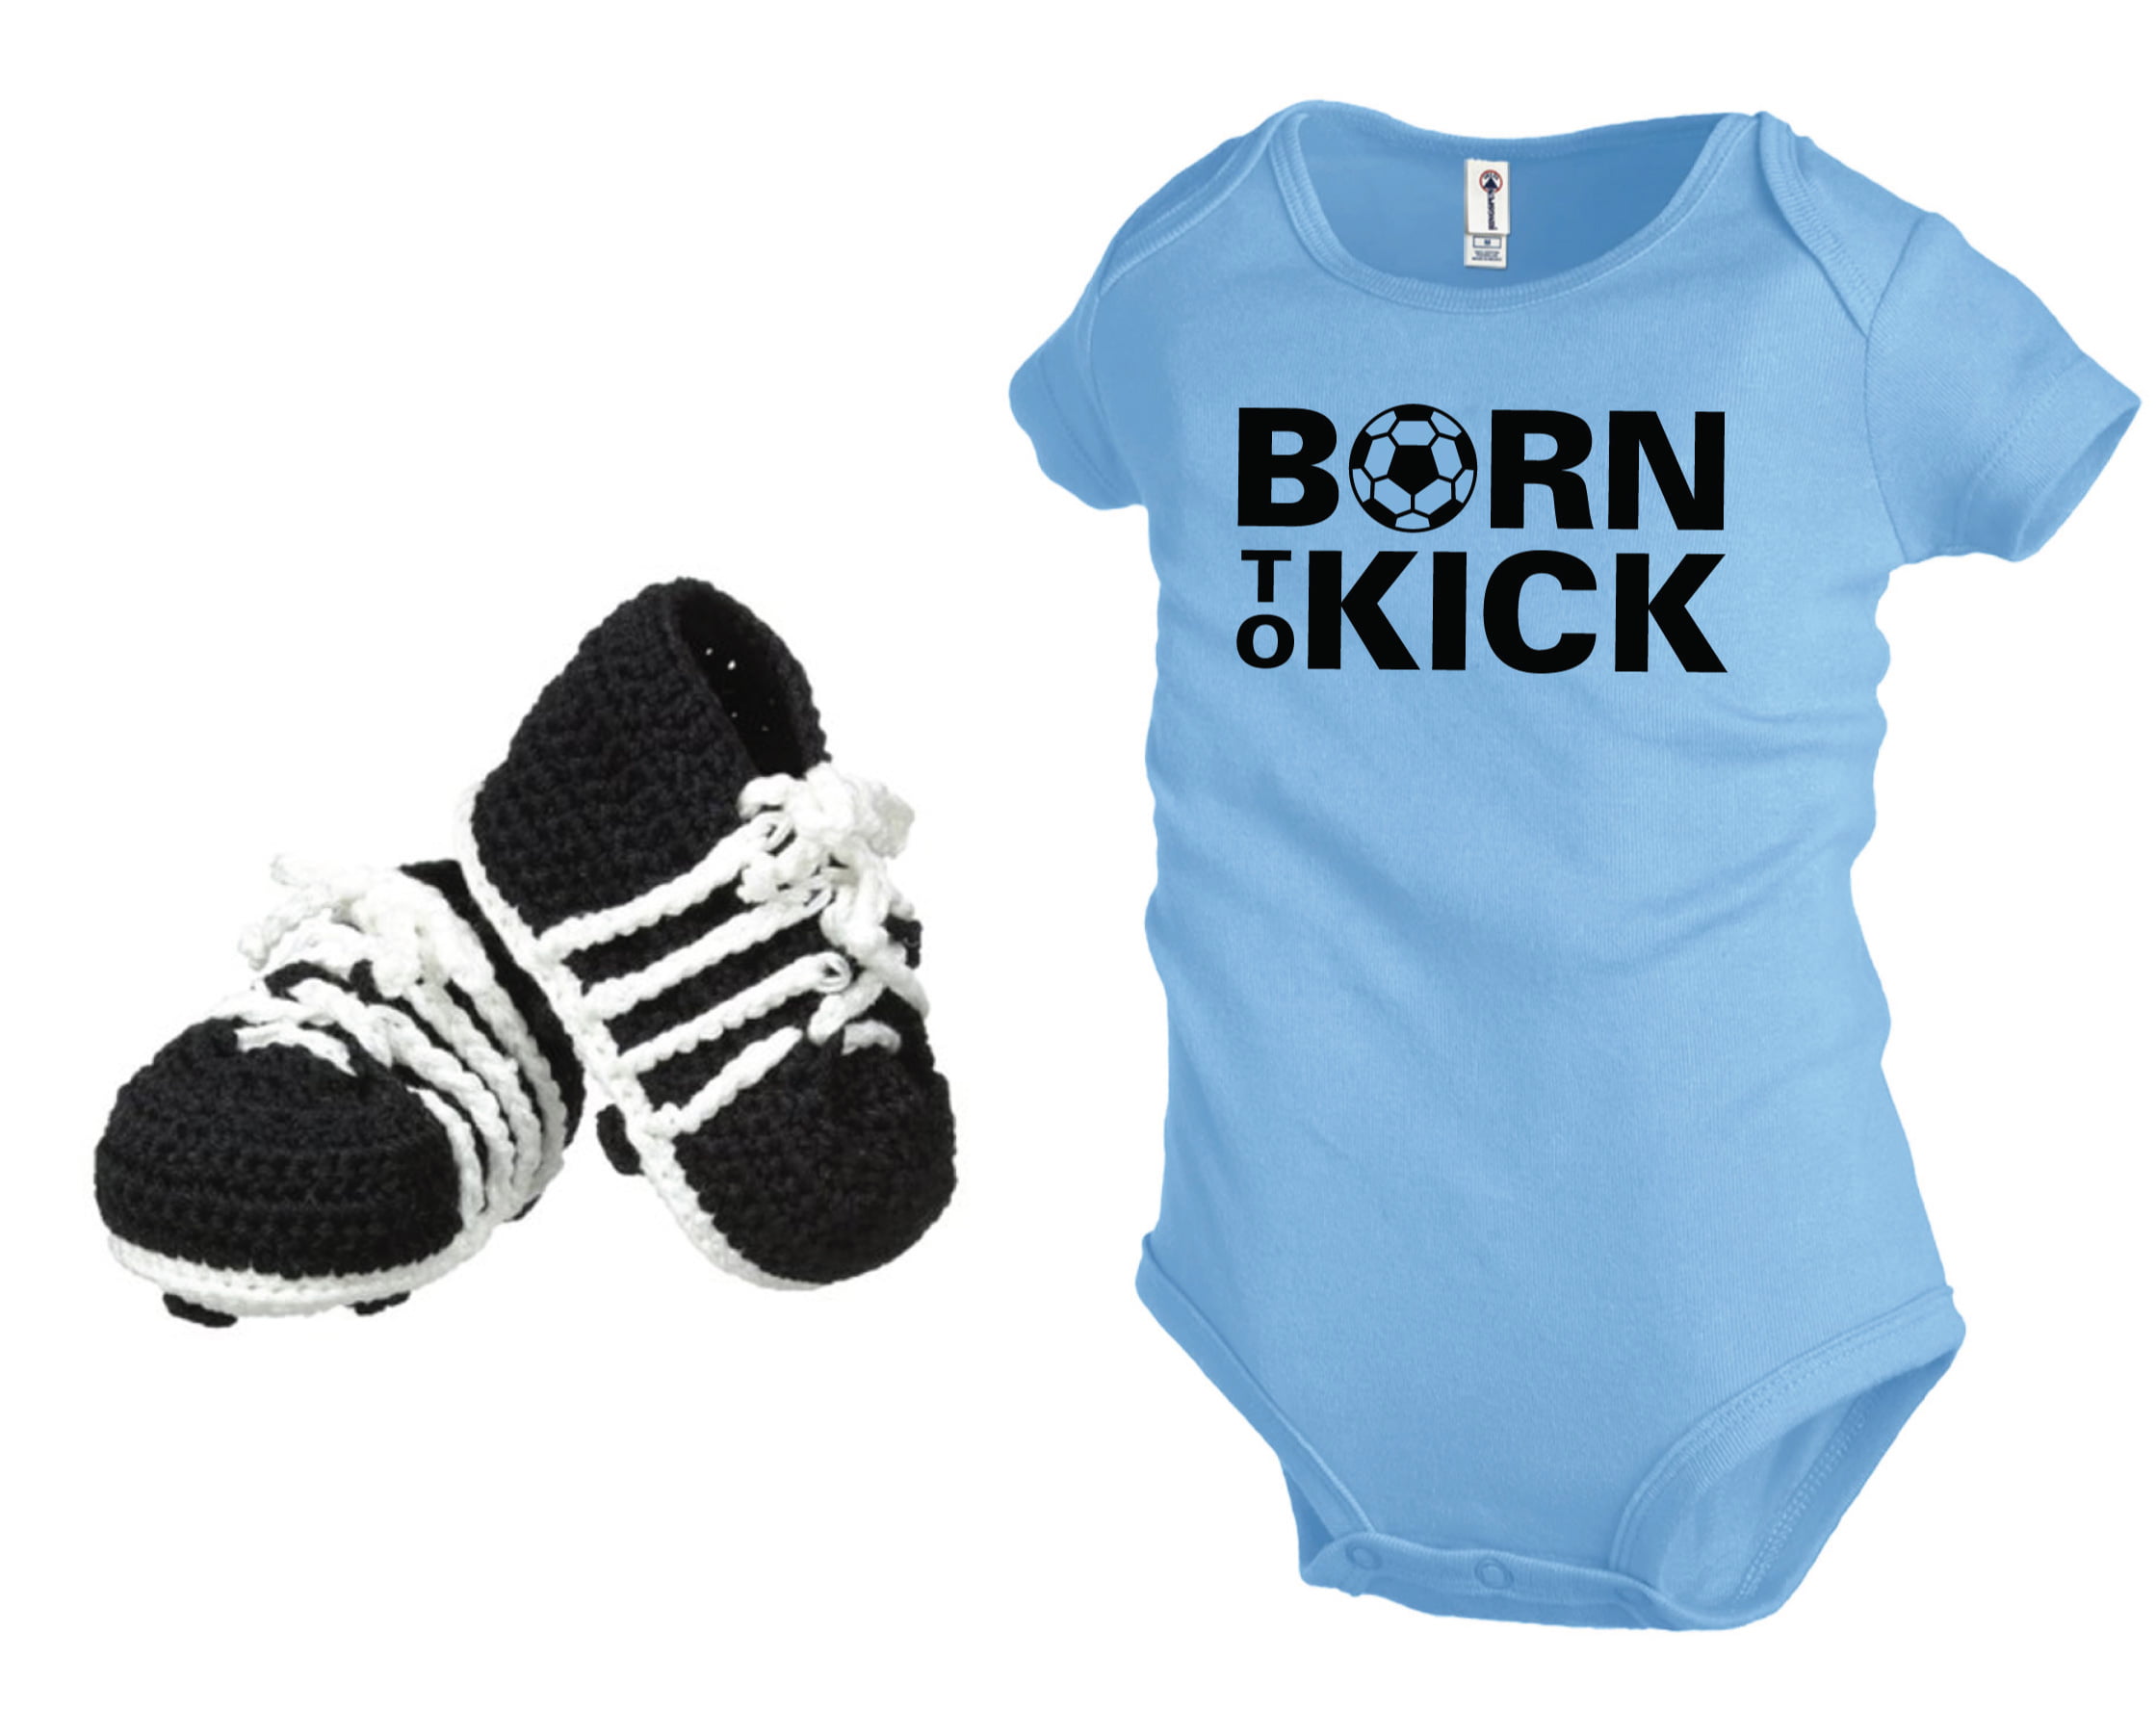 infant soccer cleats